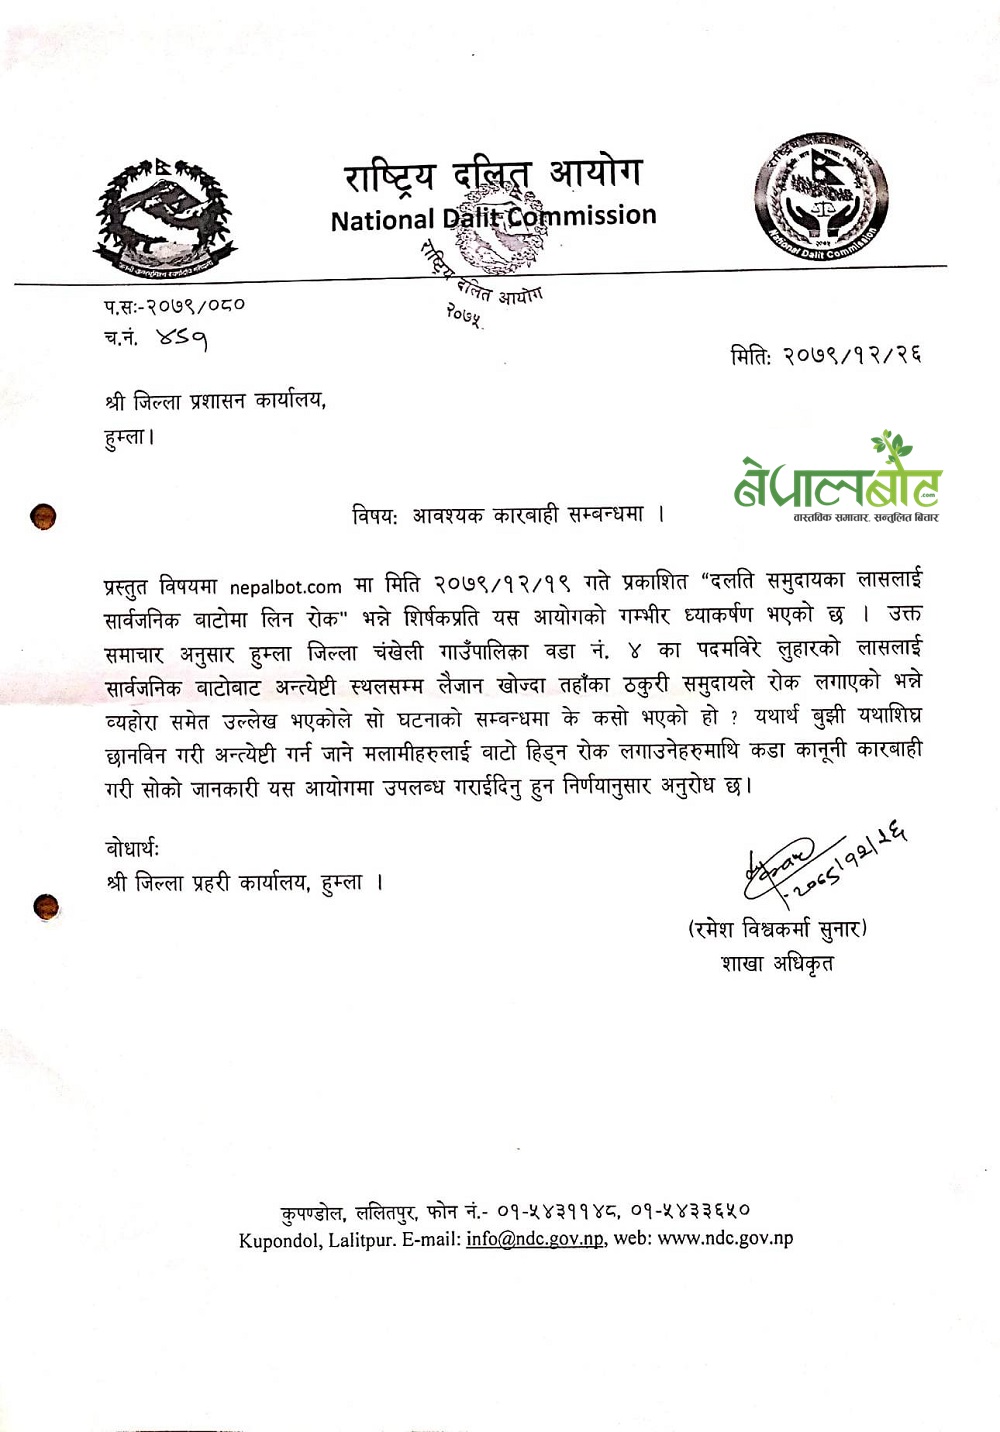 Letter for DAO Humla from Dalit commission1682601206.jpg